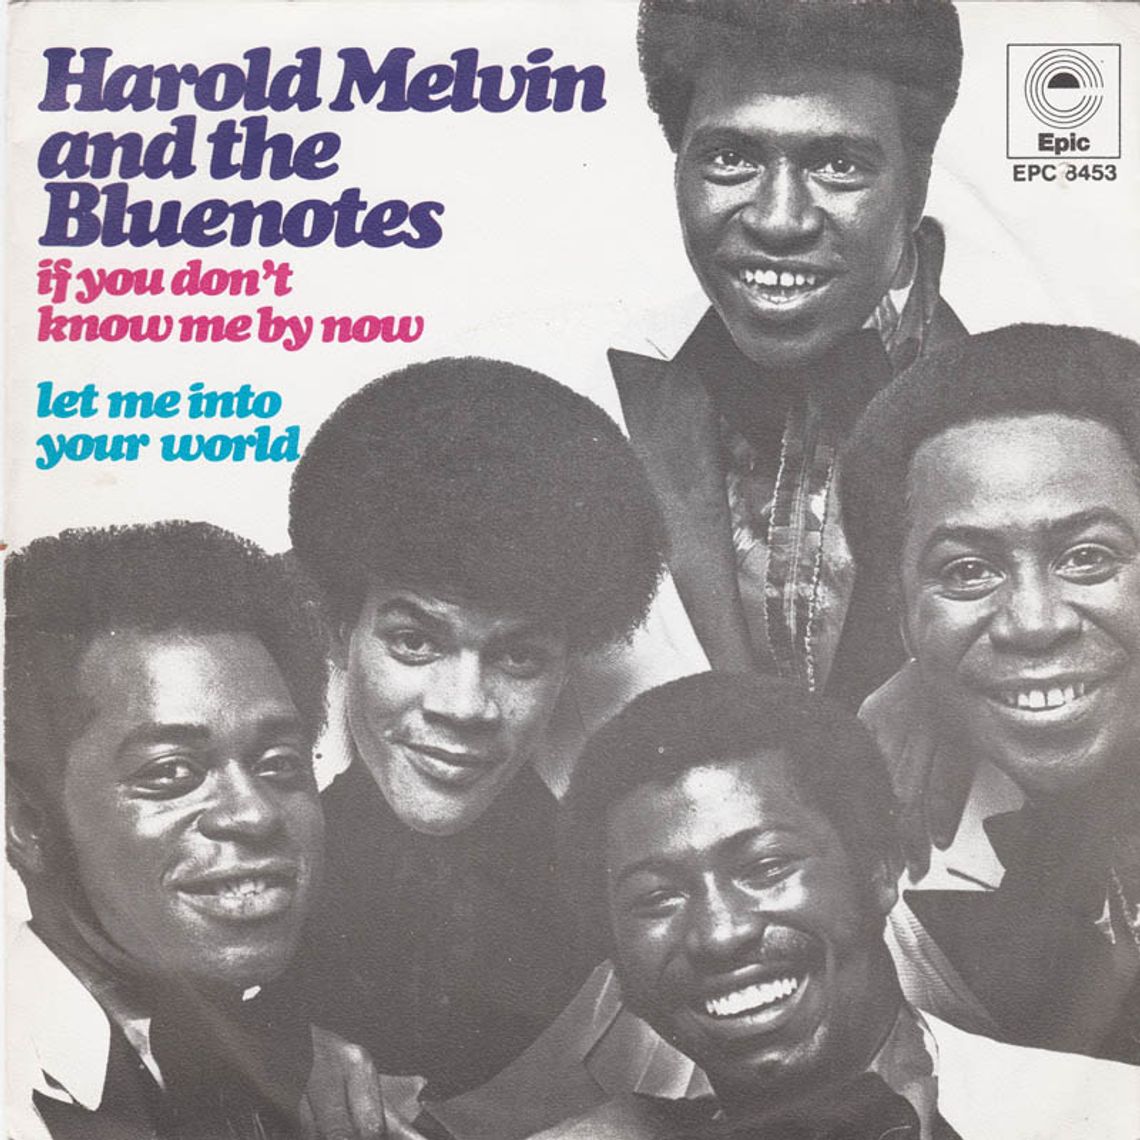 HAROLD MELVIN & THE BLUE NOTES "If you don't know me by now"